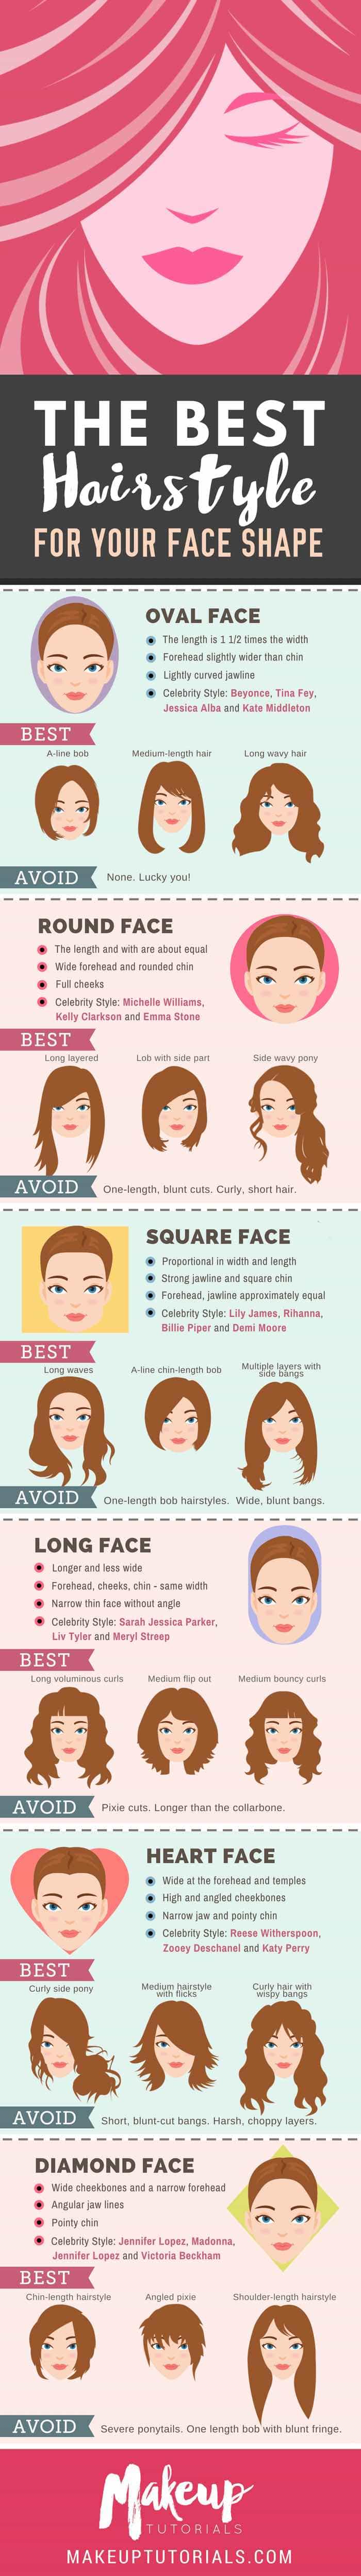 Hairstyle Guide | The Perfect Hair For Your Face Shape